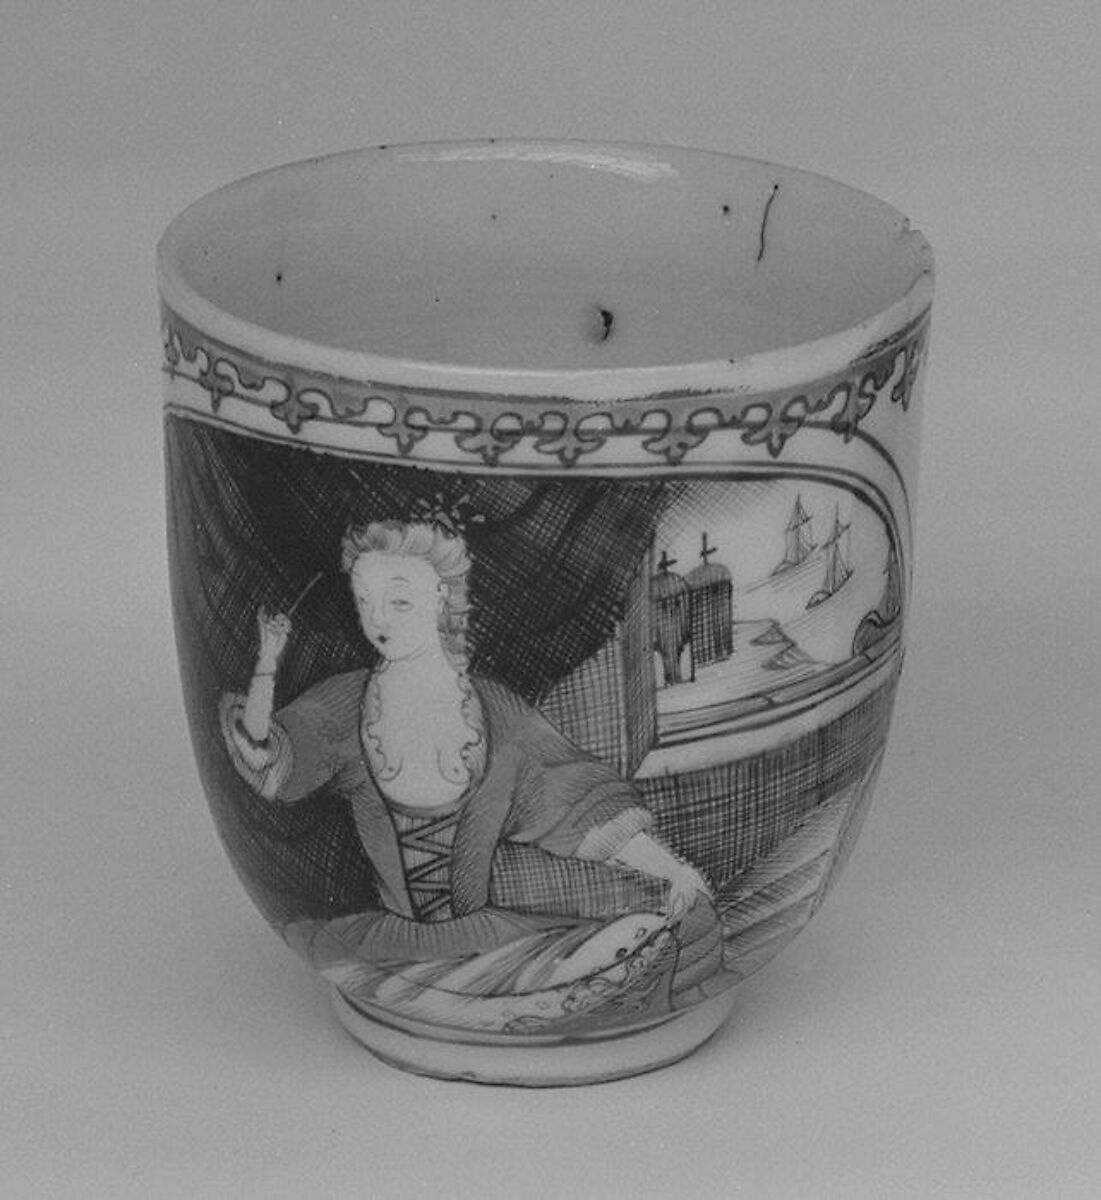 Dutch possibly of of (part market Cup Chinese, for Metropolitan Museum a | service) The | Art